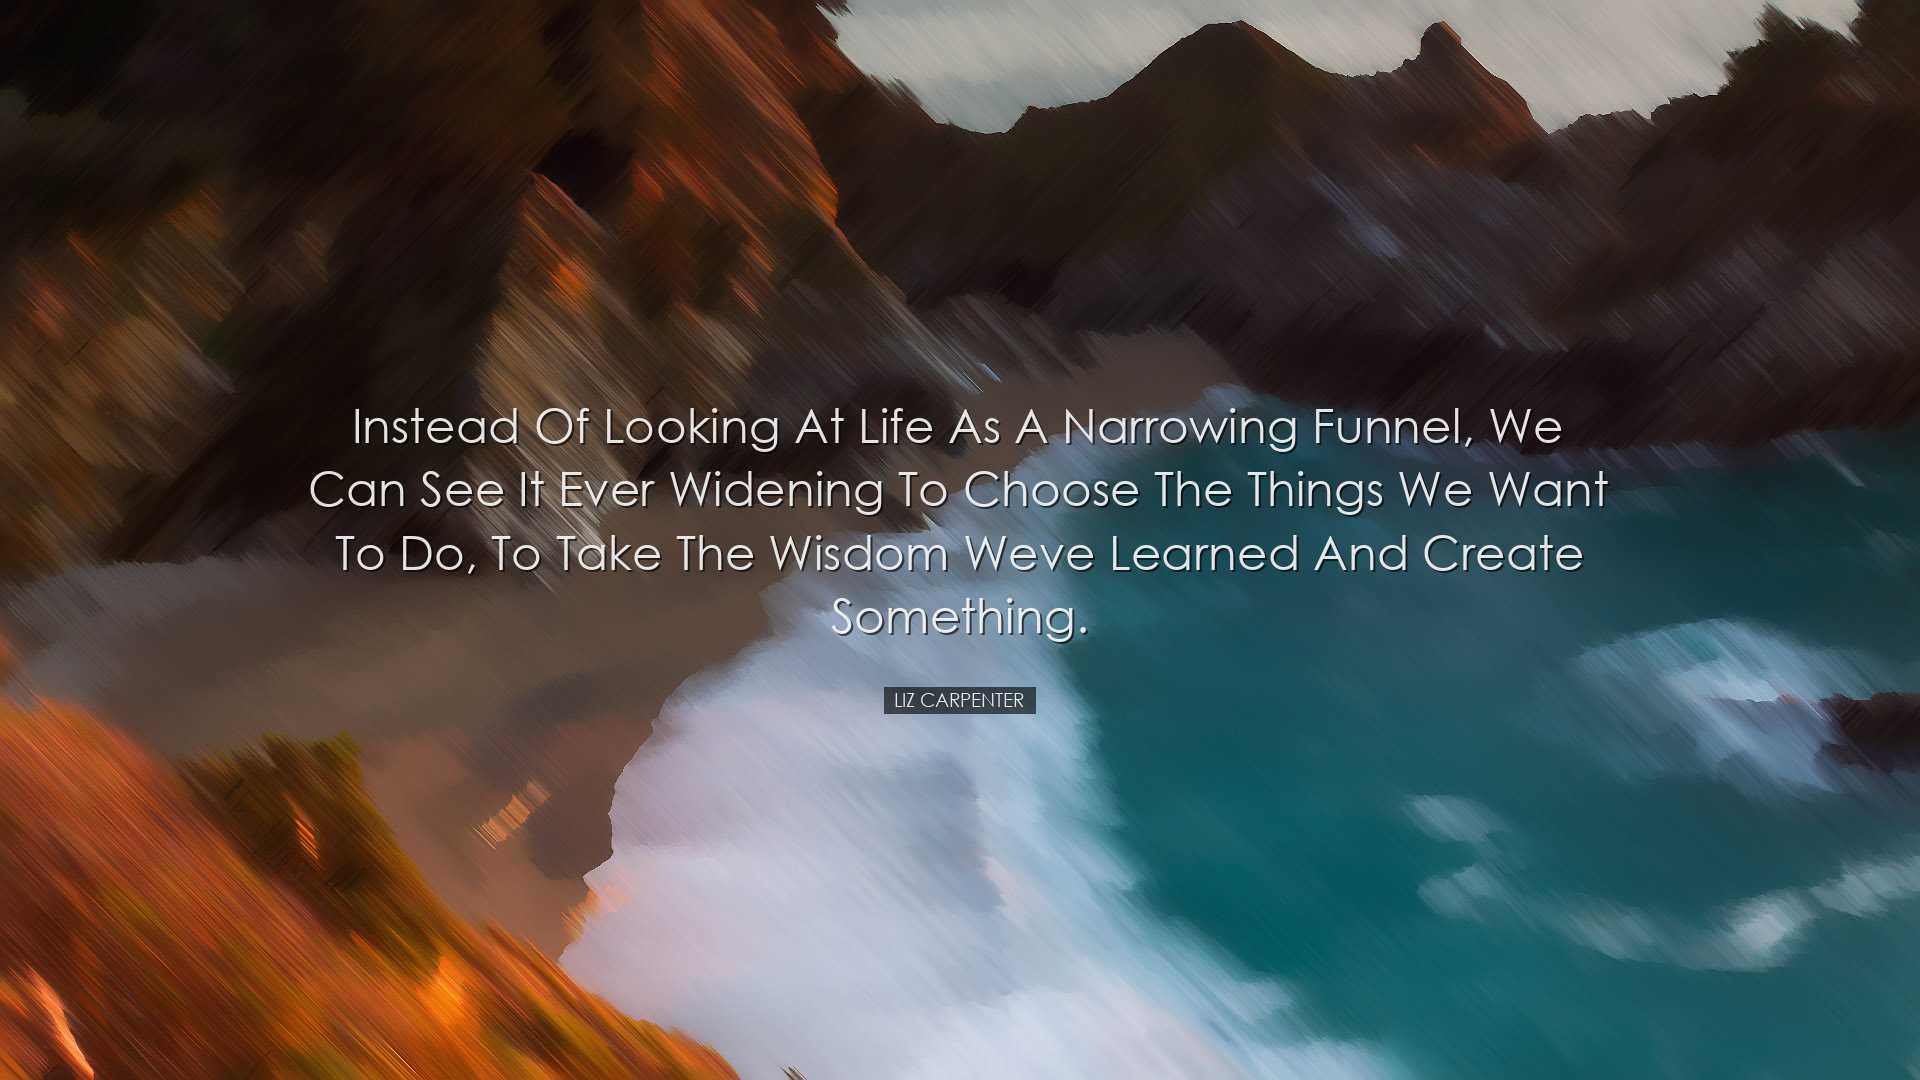 Instead of looking at life as a narrowing funnel, we can see it ev